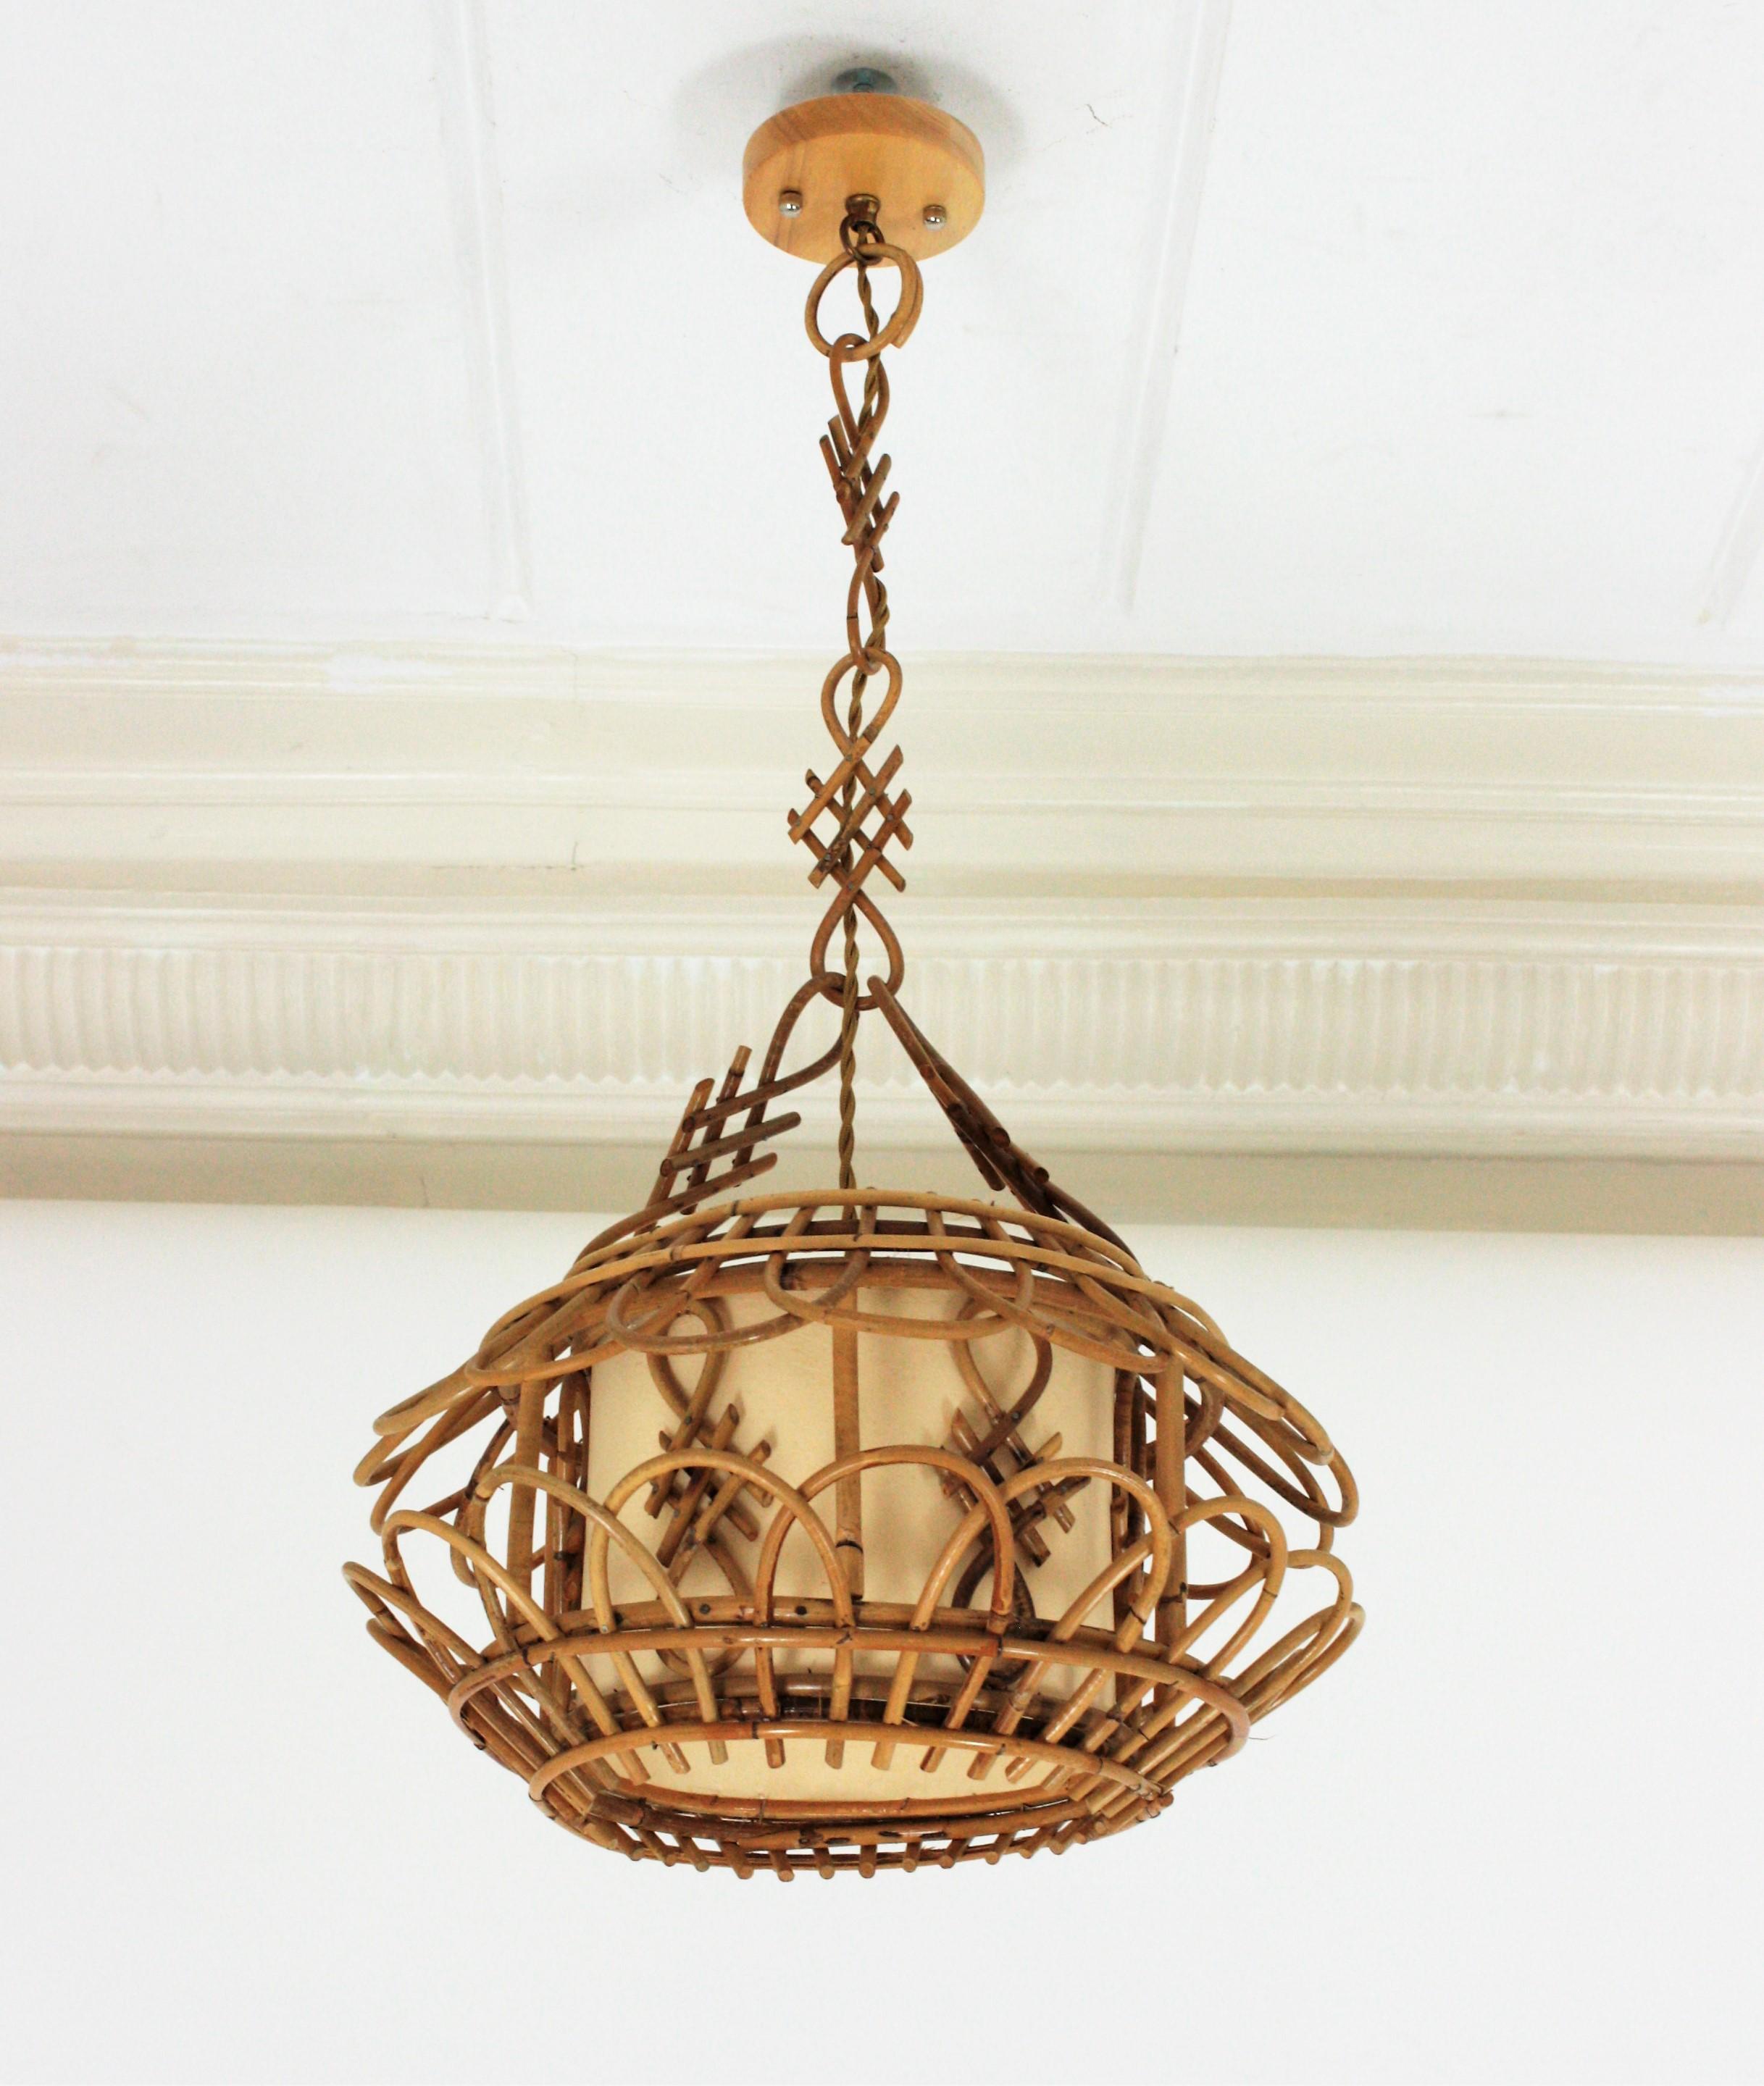 20th Century French Modernist Rattan Pagoda Pendant Lamp or Lantern with Chinoiserie Accents